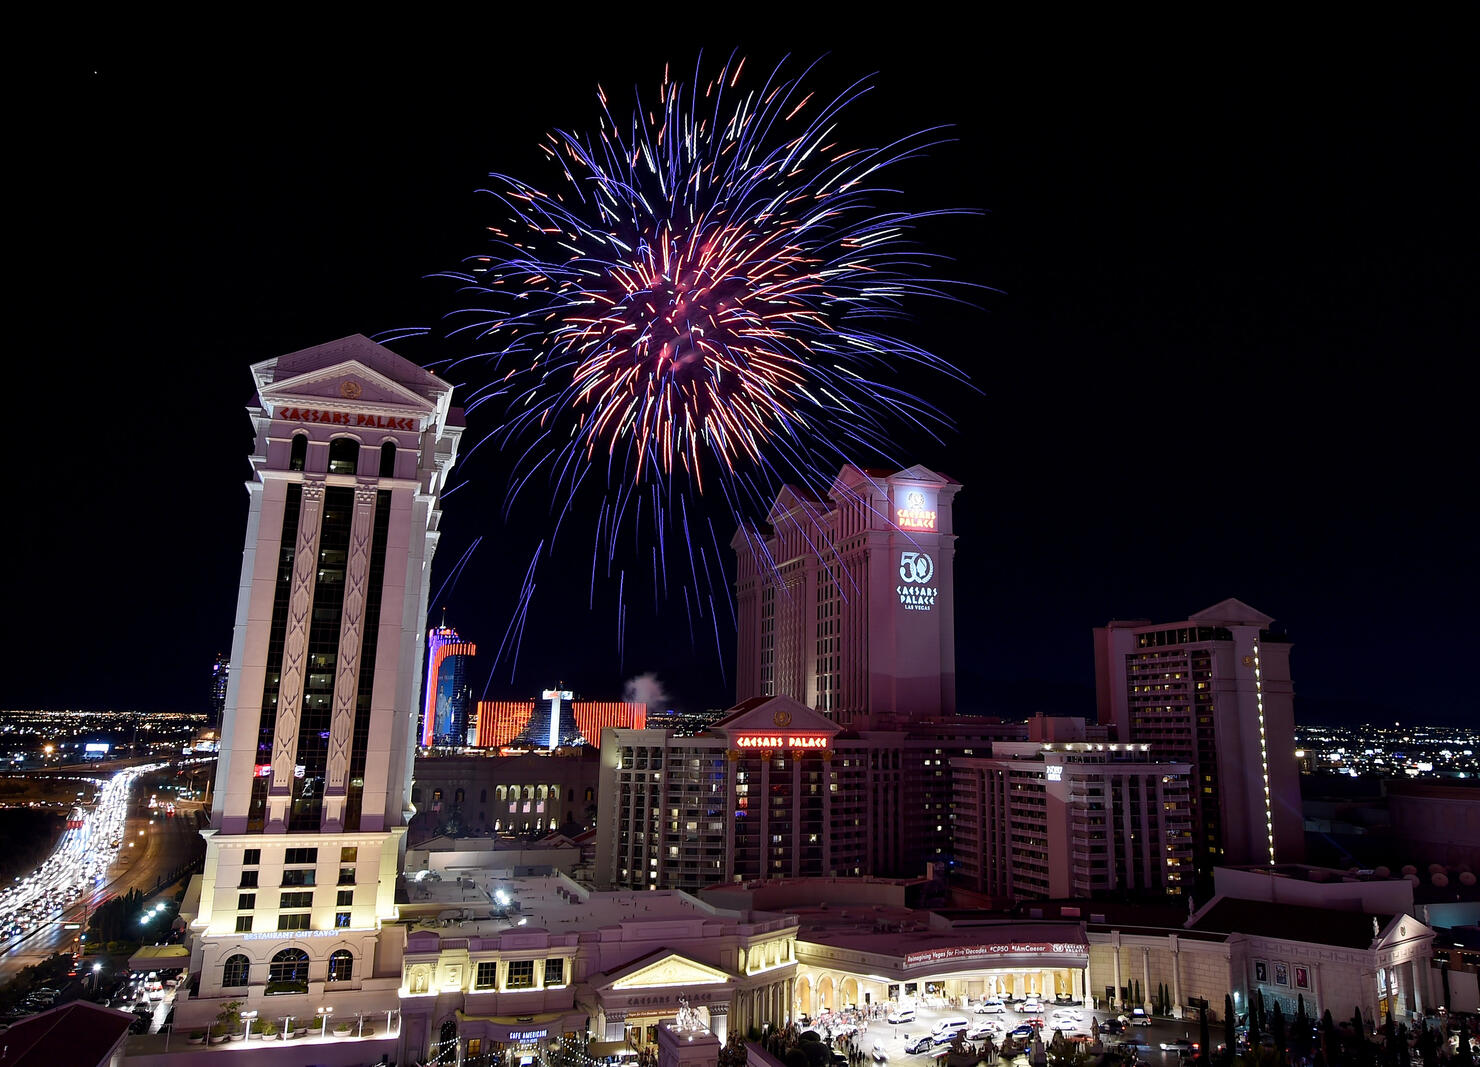 July 4th Celebration at the Pier in Las Vegas, NV